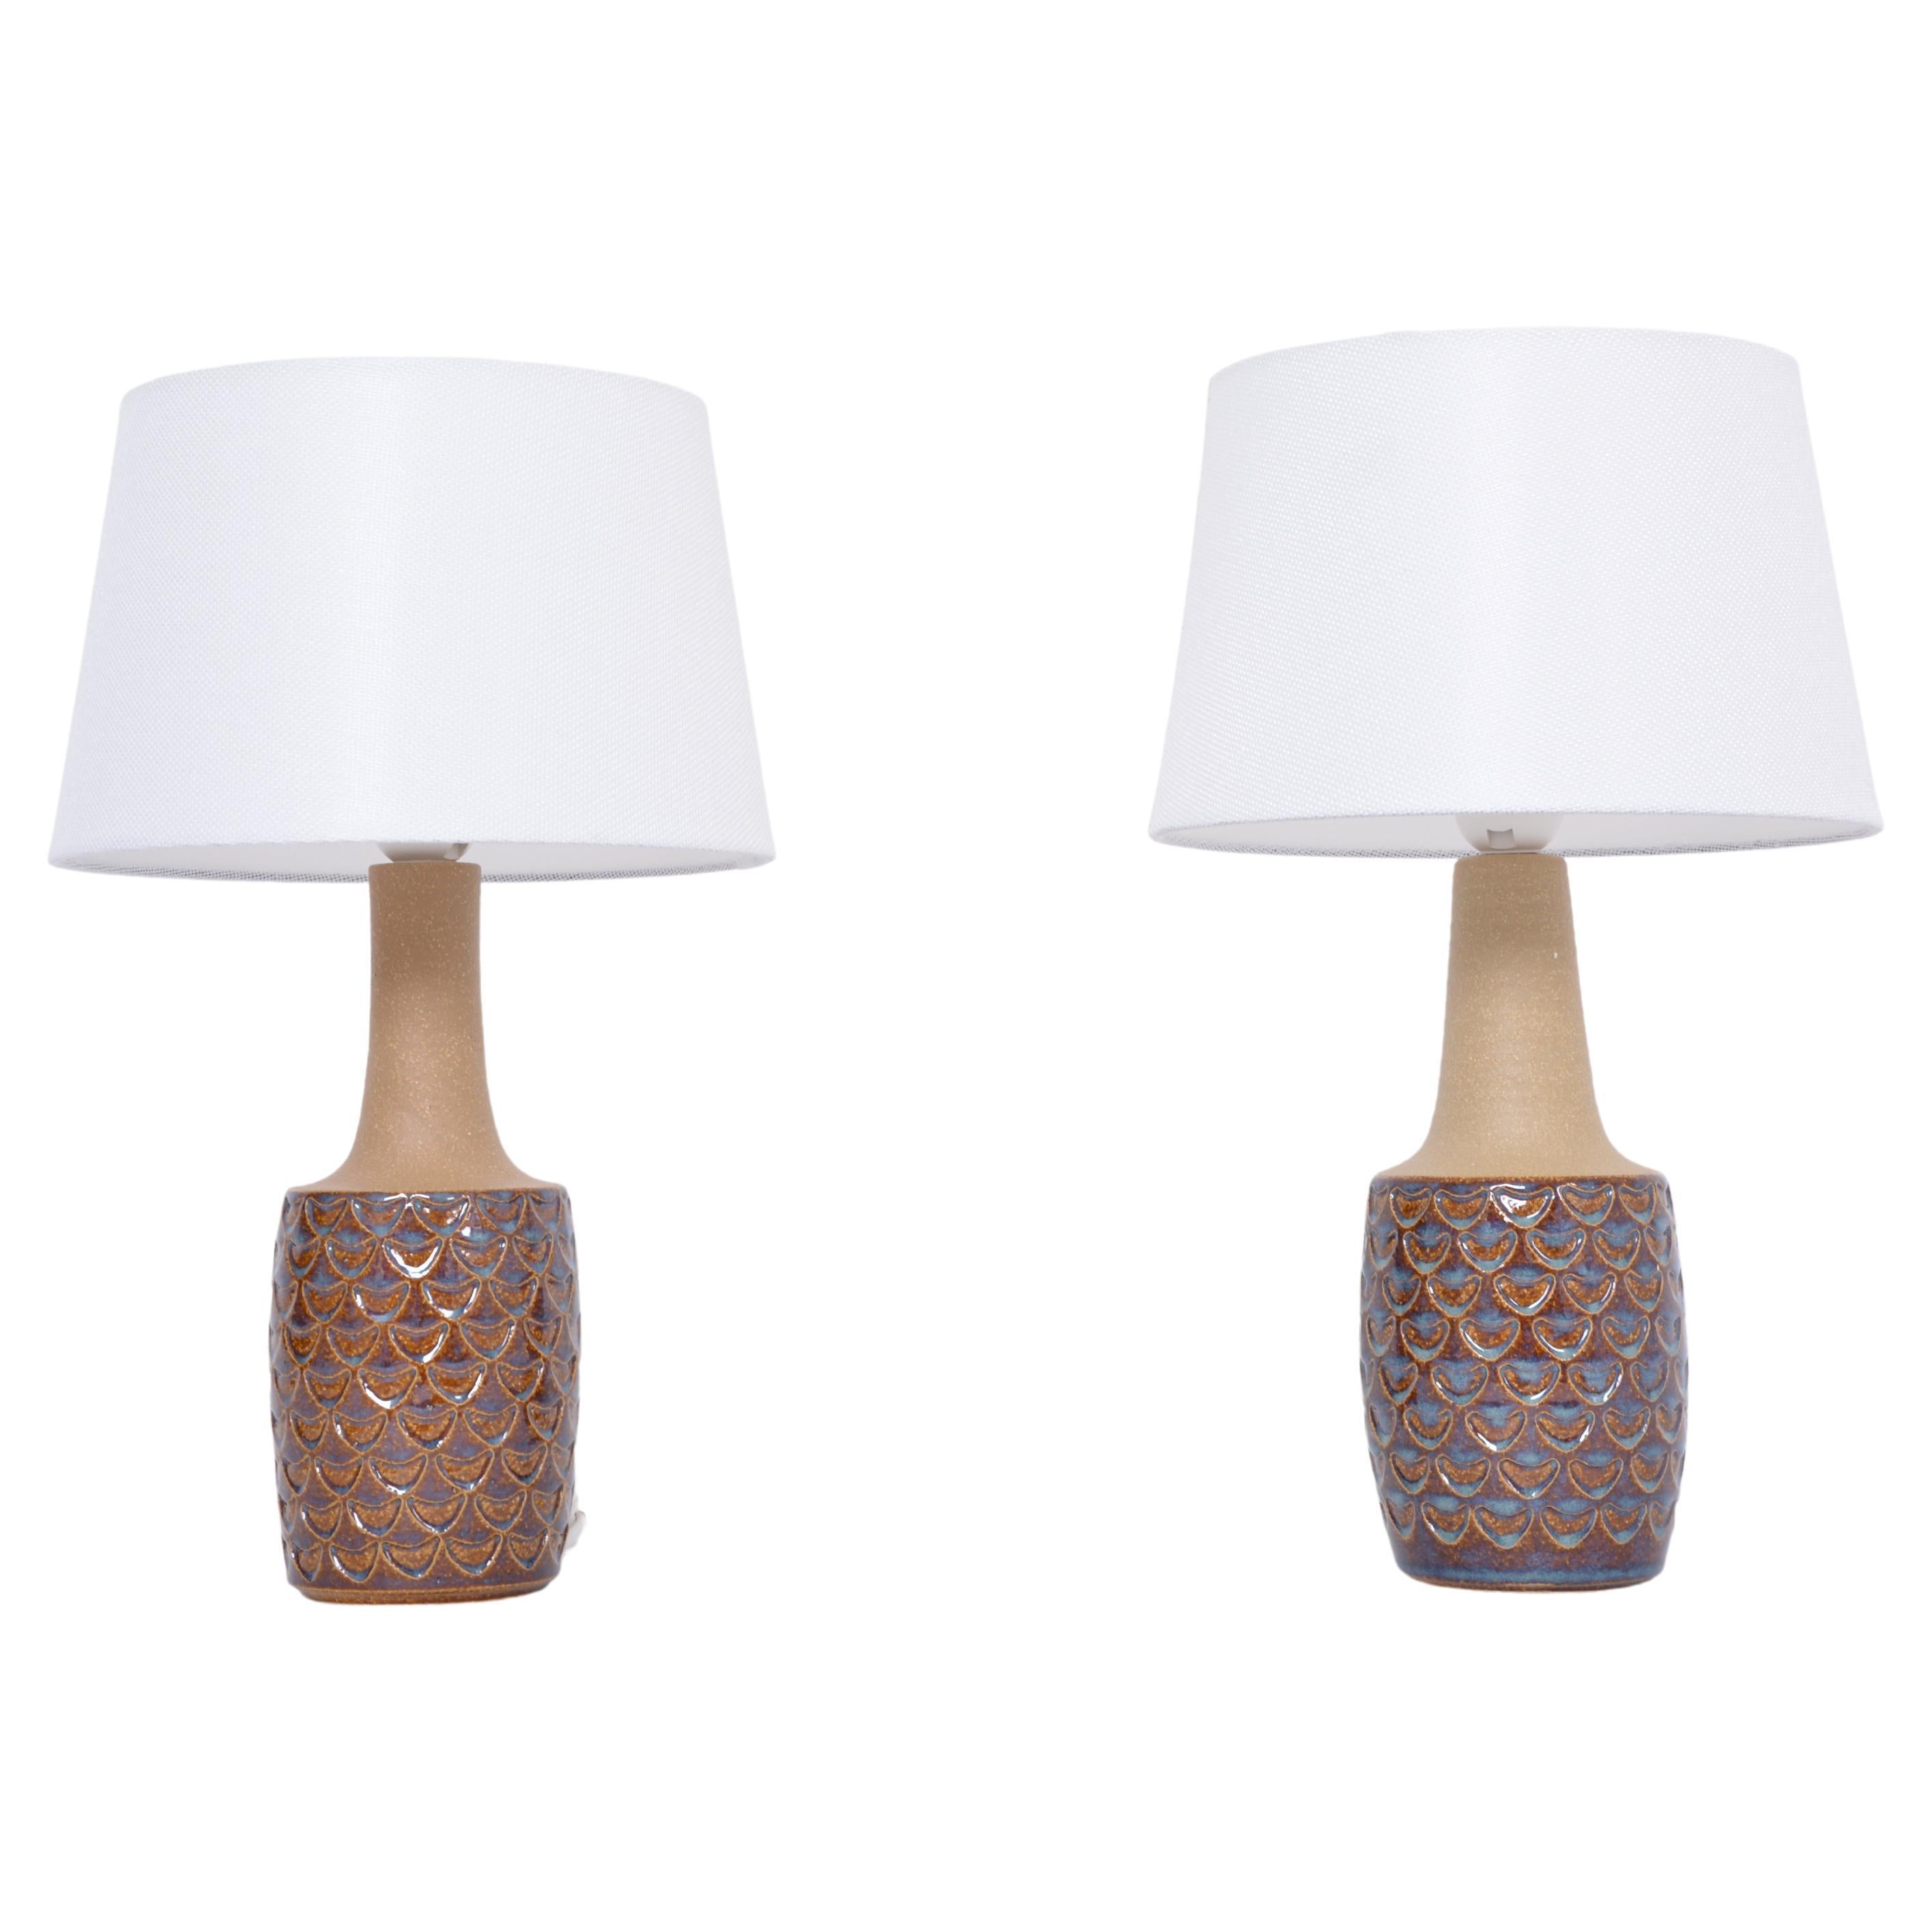 Pair of Midcentury Handmade Stoneware Table Lamps by Einar Johansen for Soholm For Sale